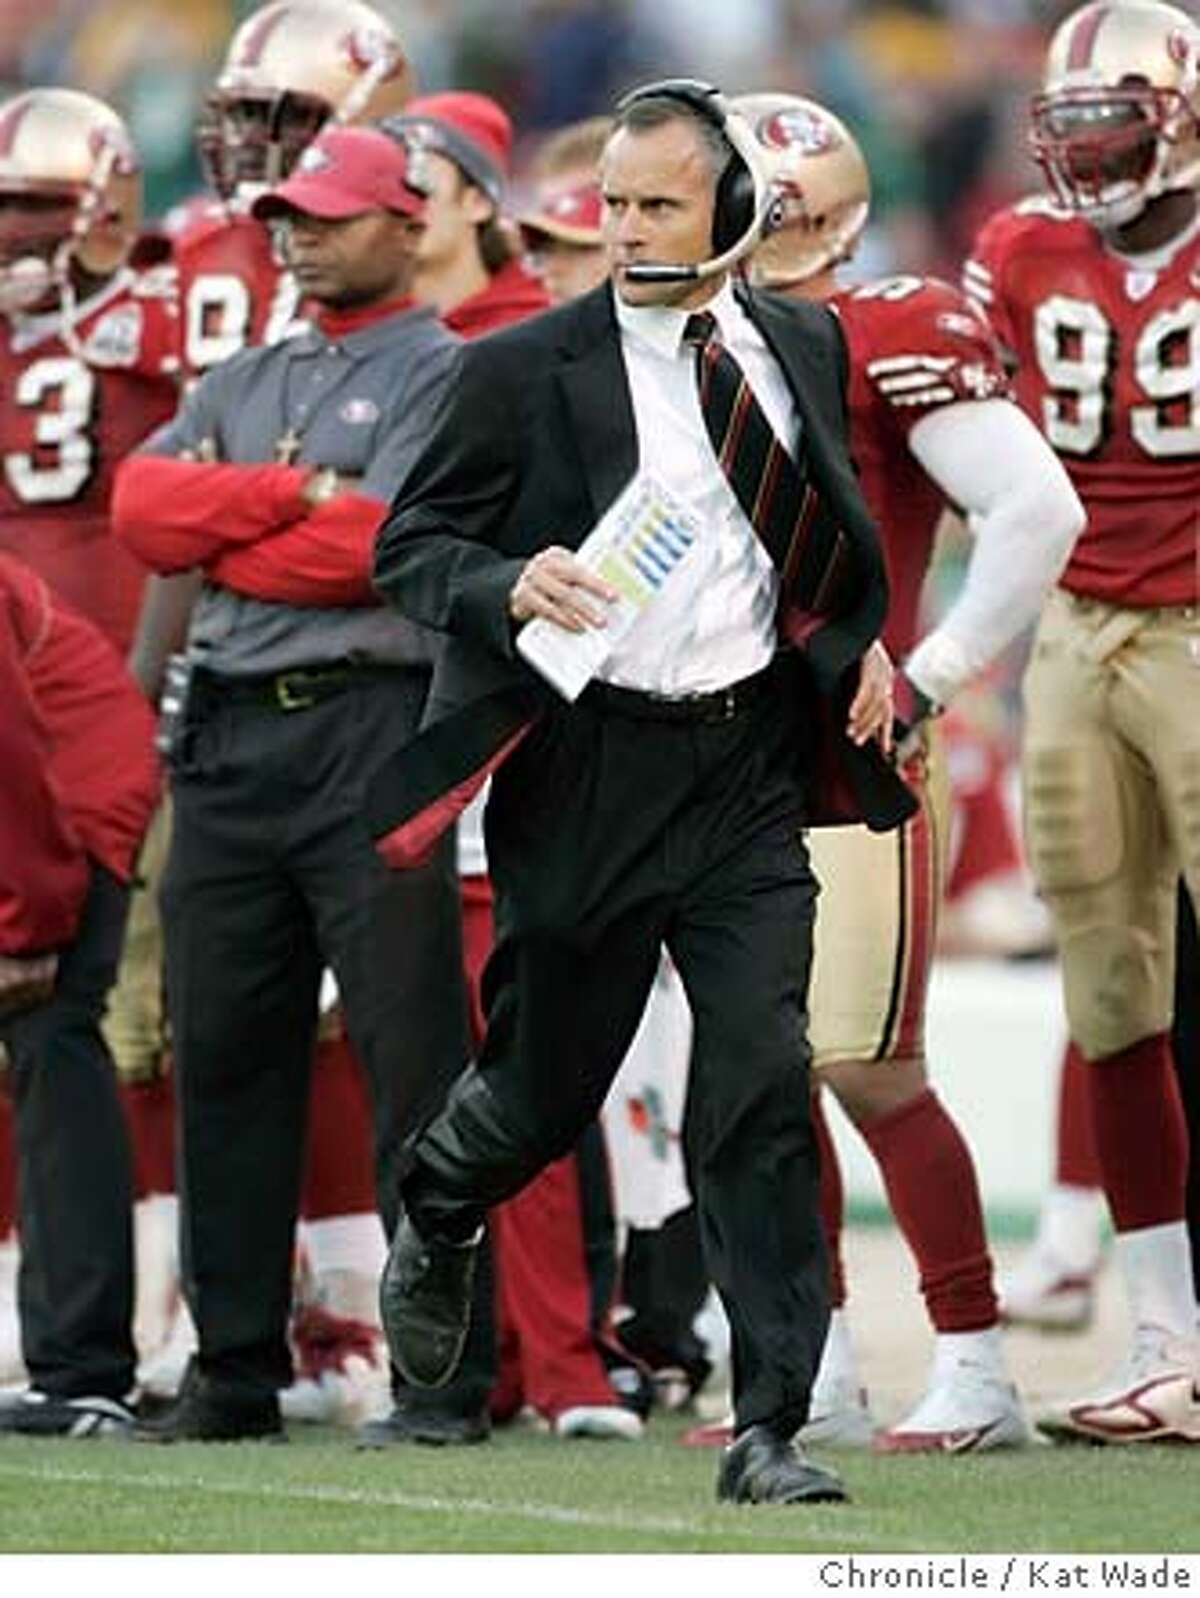 49ers10_0090_KW_.jpg The San Francisco 49er's head coach Mike Nolan runs down the field in the 4th quarter of the game against the Green Bay Packers at Monster Park in San Francisco on Sunday December 10, 2006. Kat Wade/The Chronicle Mandatory Credit for San Francisco Chronicle and photographer, Kat Wade, No Sales Mags out